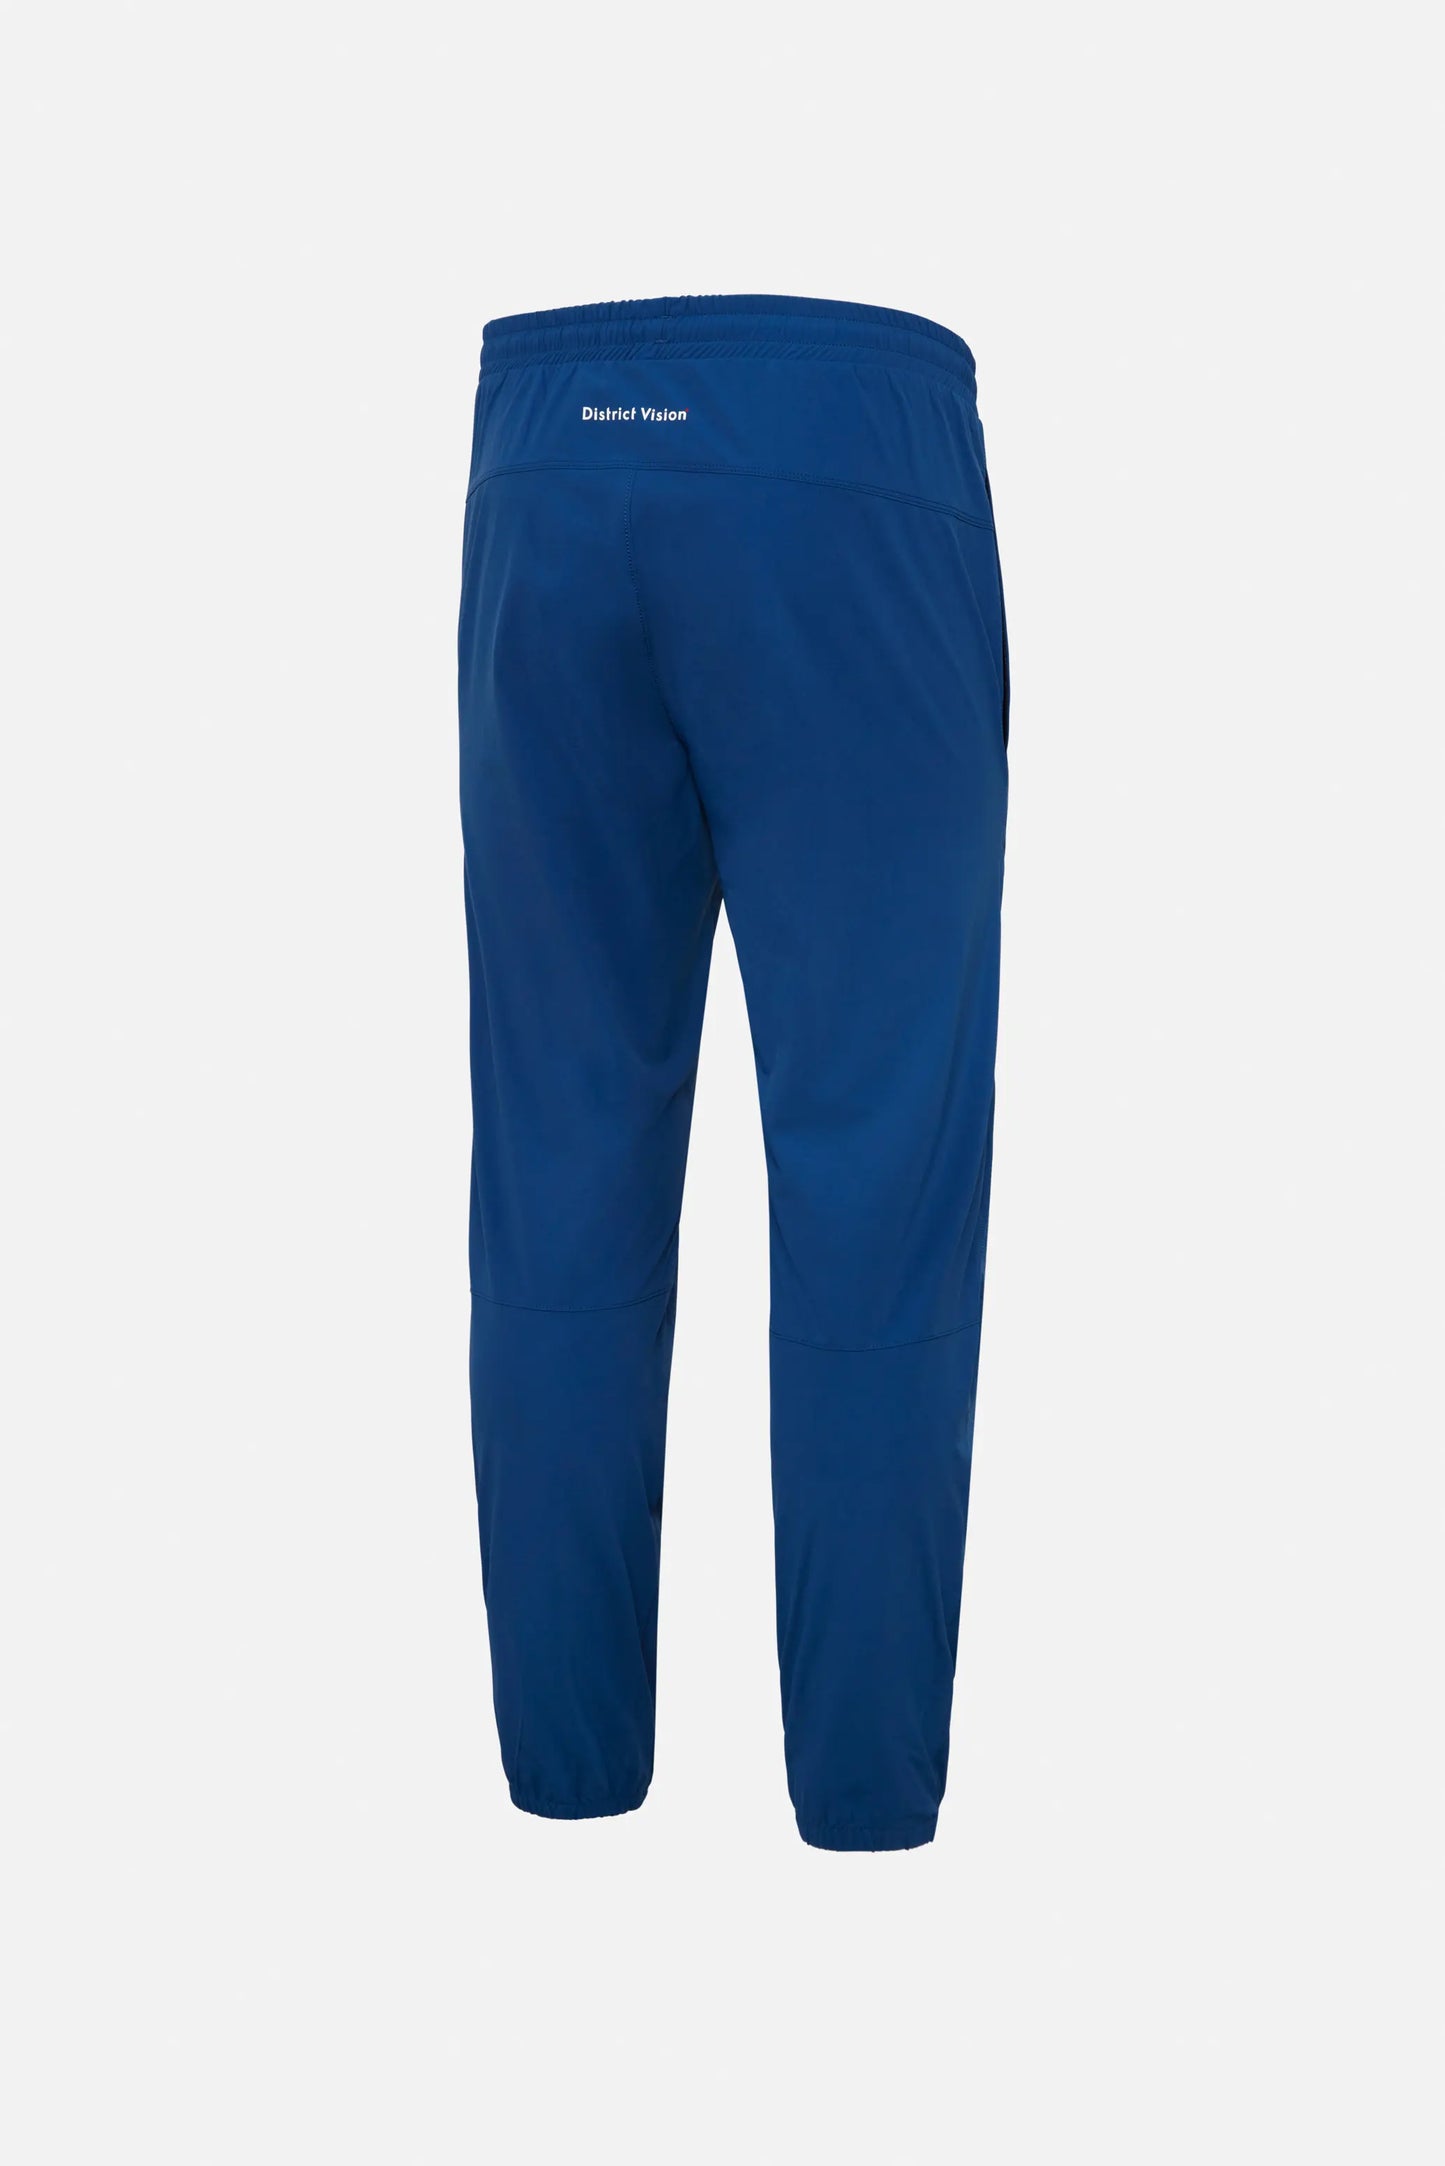 District Vision Zanzie Track Pant in Navy